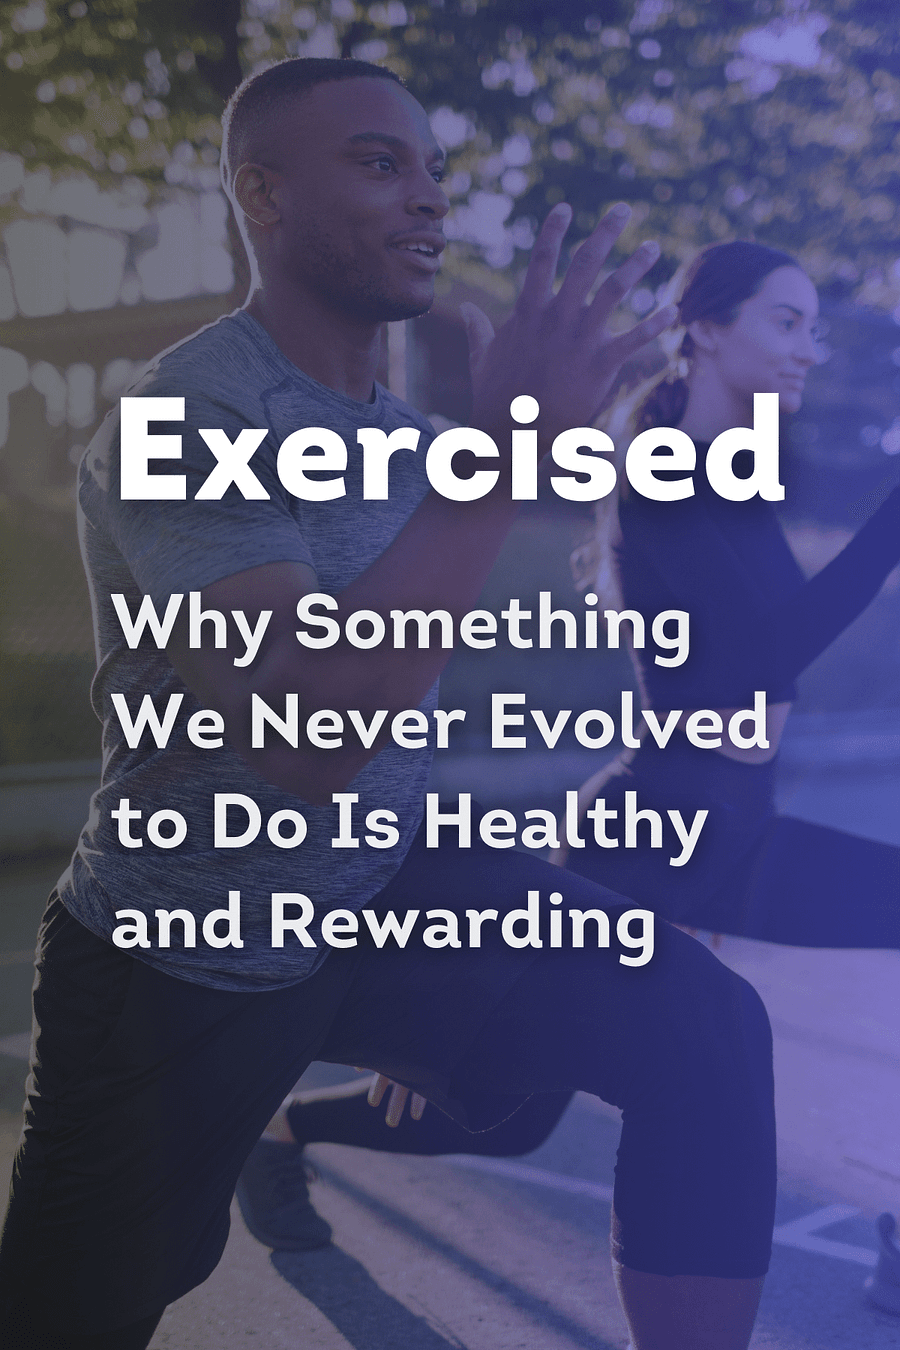 Exercised by Daniel Lieberman - Book Summary